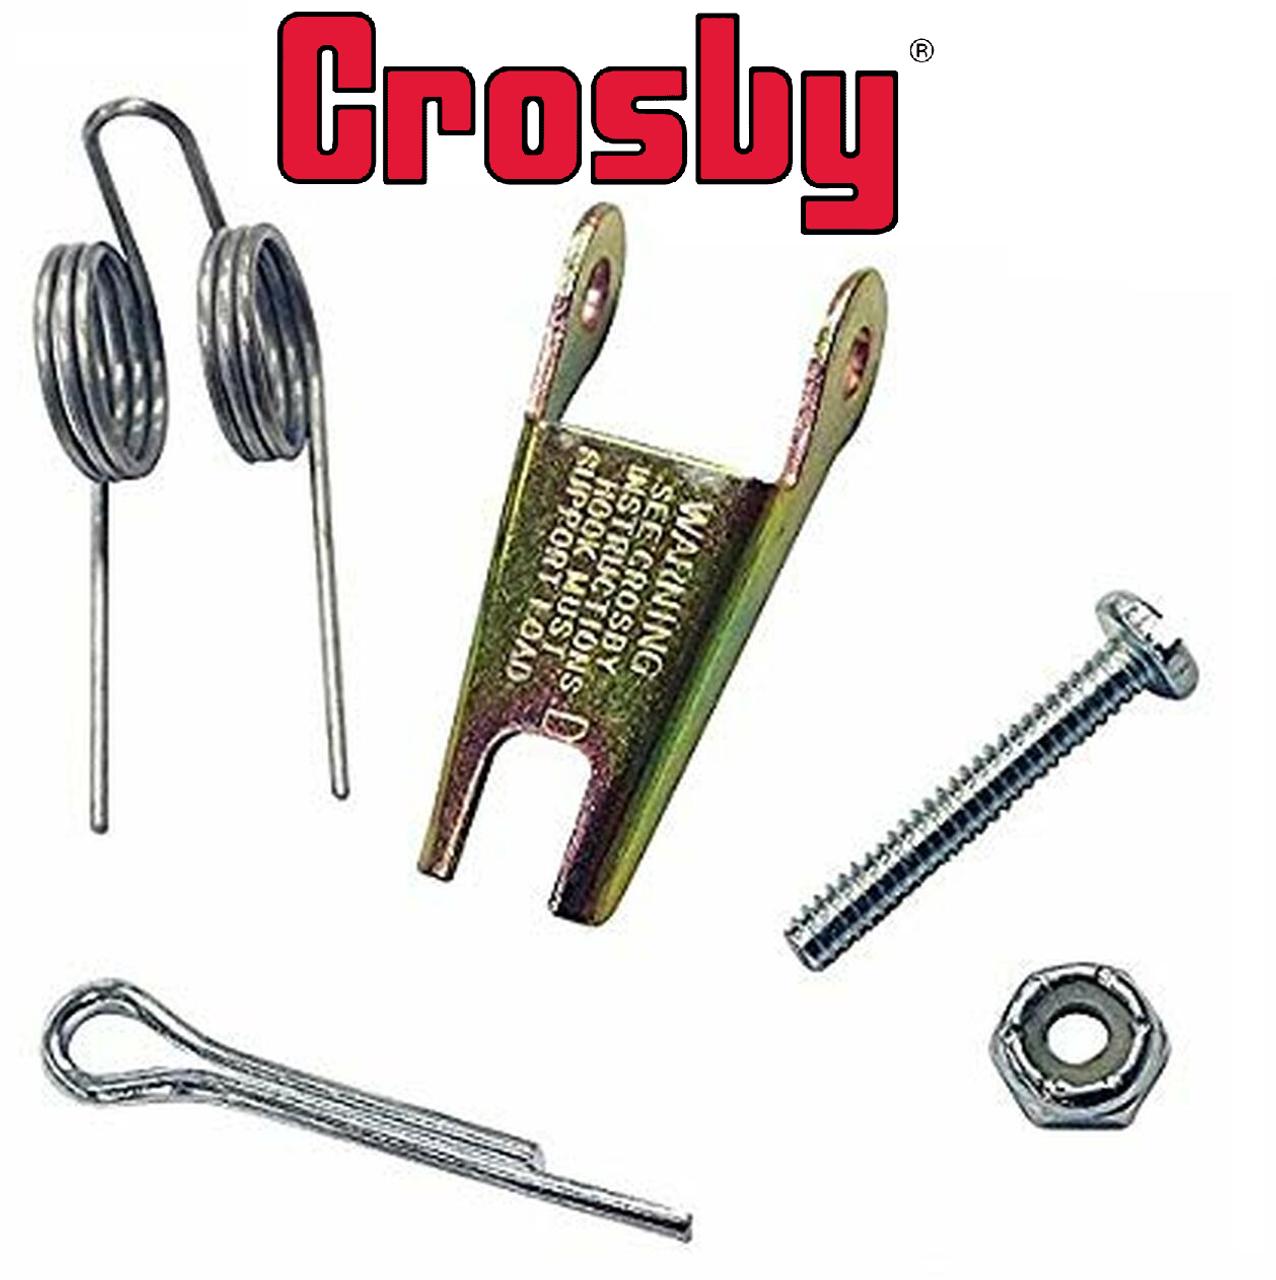 images-hook-latch-kit-spring-hook-CROSBY-S-4320-lifting-hooks-accessories-the-crosby-group-cyprus-thessaloniki-volos-larisa-synodinos-asfaleia-gantzou-synodinos